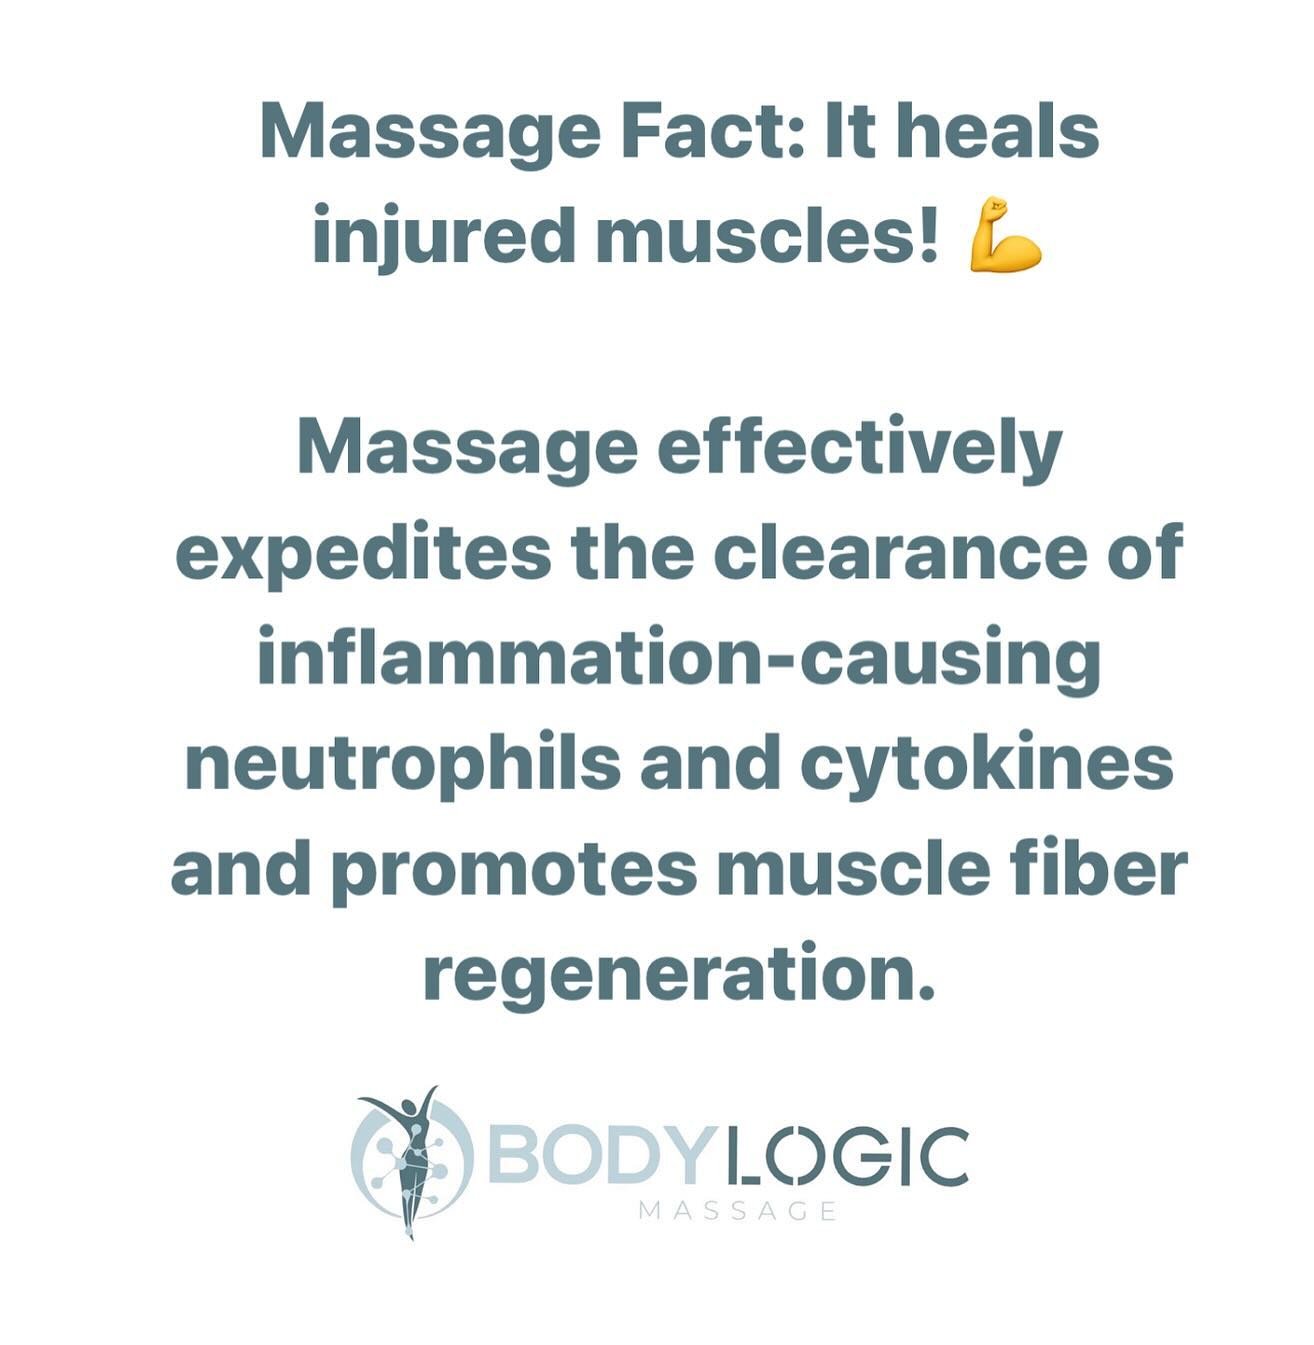 A study by Harvard&rsquo;s Wyss Institute and SEAS demonstrates that massage and mechanotherapies not only alleviate muscle soreness but also significantly enhance muscle healing and strength by employing a robotic system to apply consistent mechanic